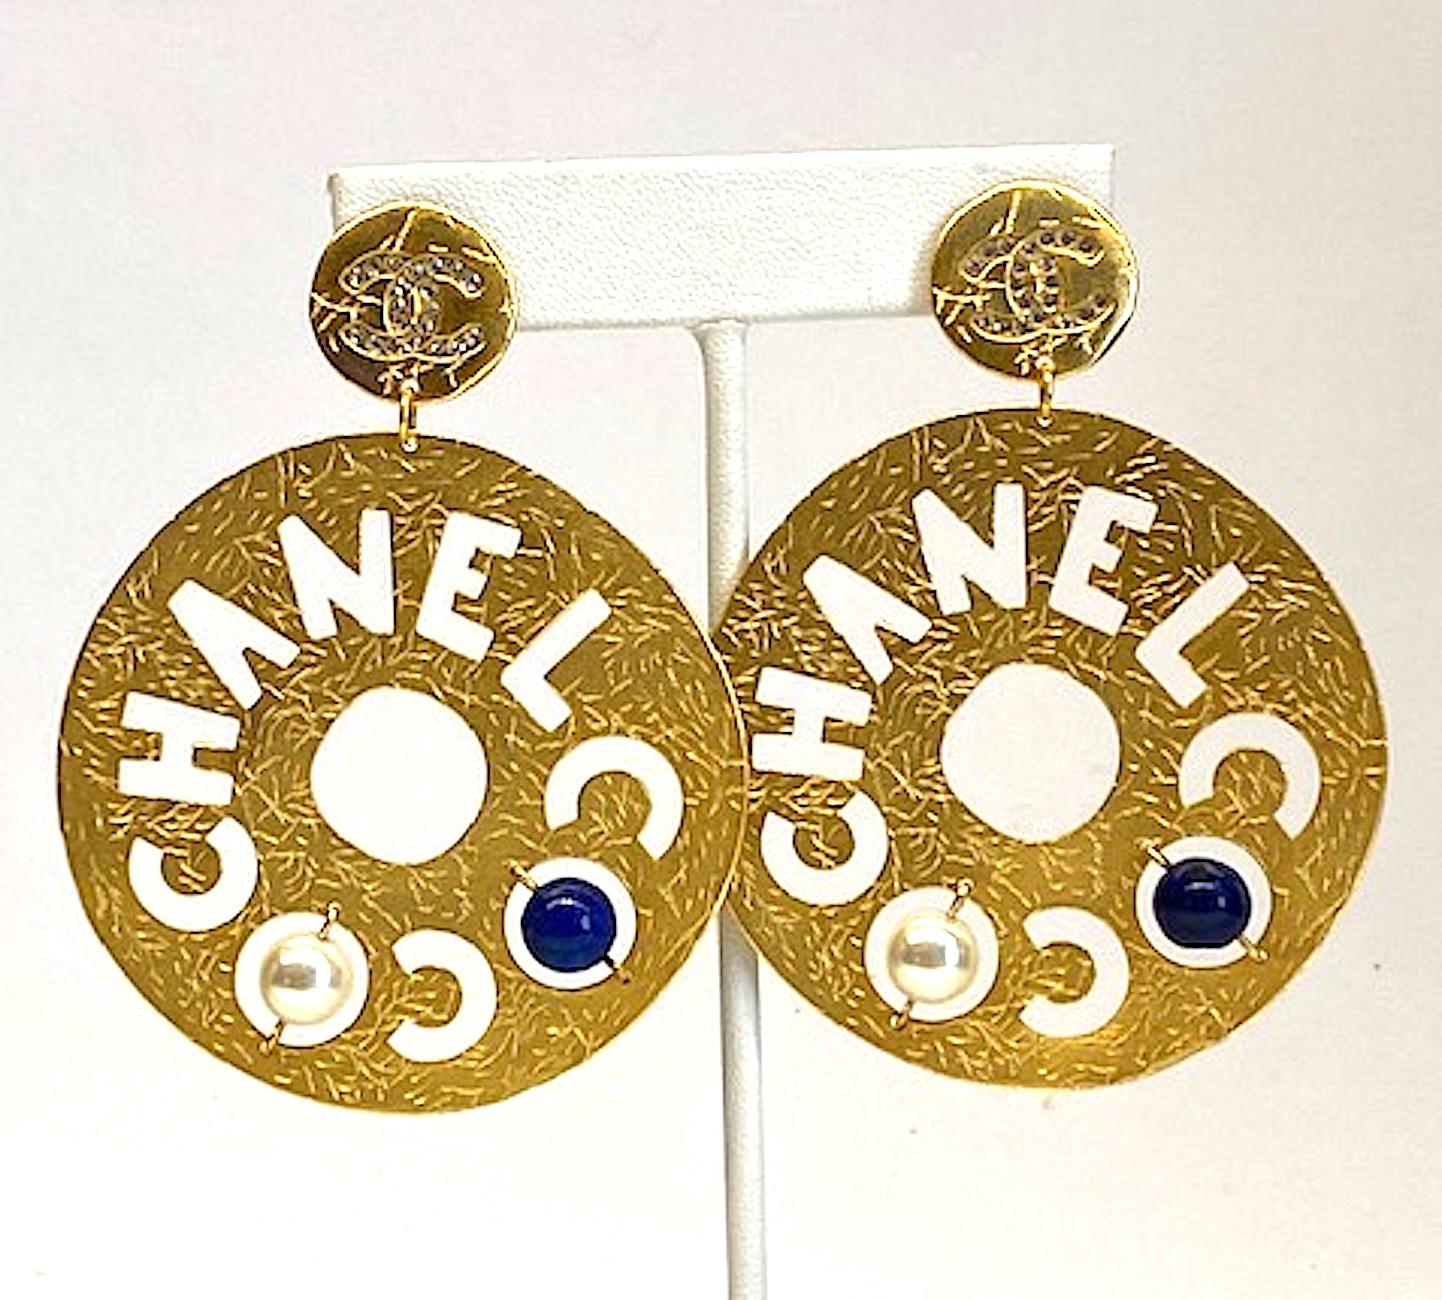 Chanel large slightly irregular round shape disk pendant Pierced earrings. They are in a satin textured gold tone and from the 2019 Autumn collection. The words Coco and Chanel are cut out from the disk. The two Os in Coco have a faux lapis glass